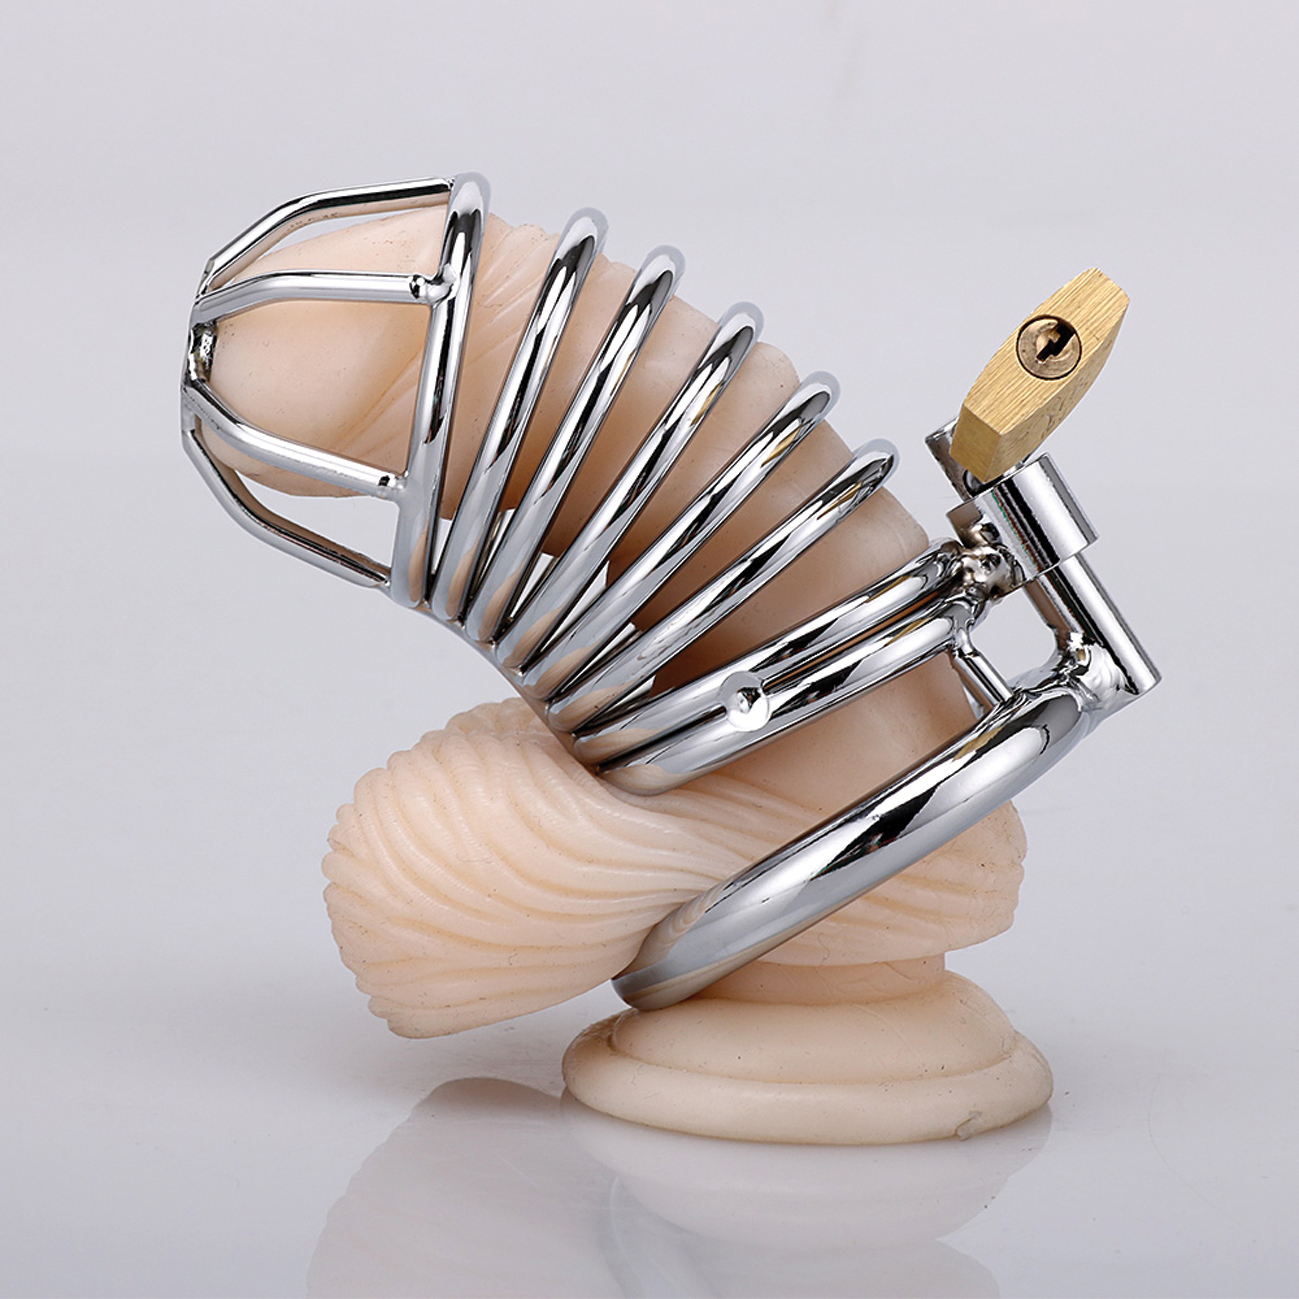 XX-DREAMSTOYS Metal Cock Cage Snake Shape